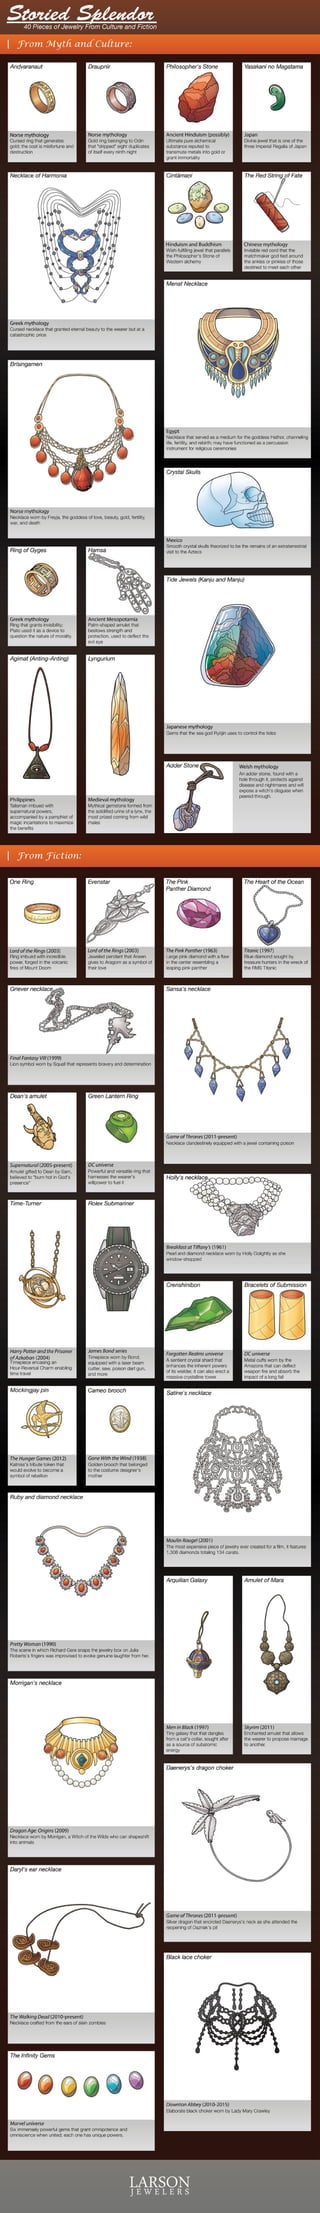 Fictional Jewels and Jewelry